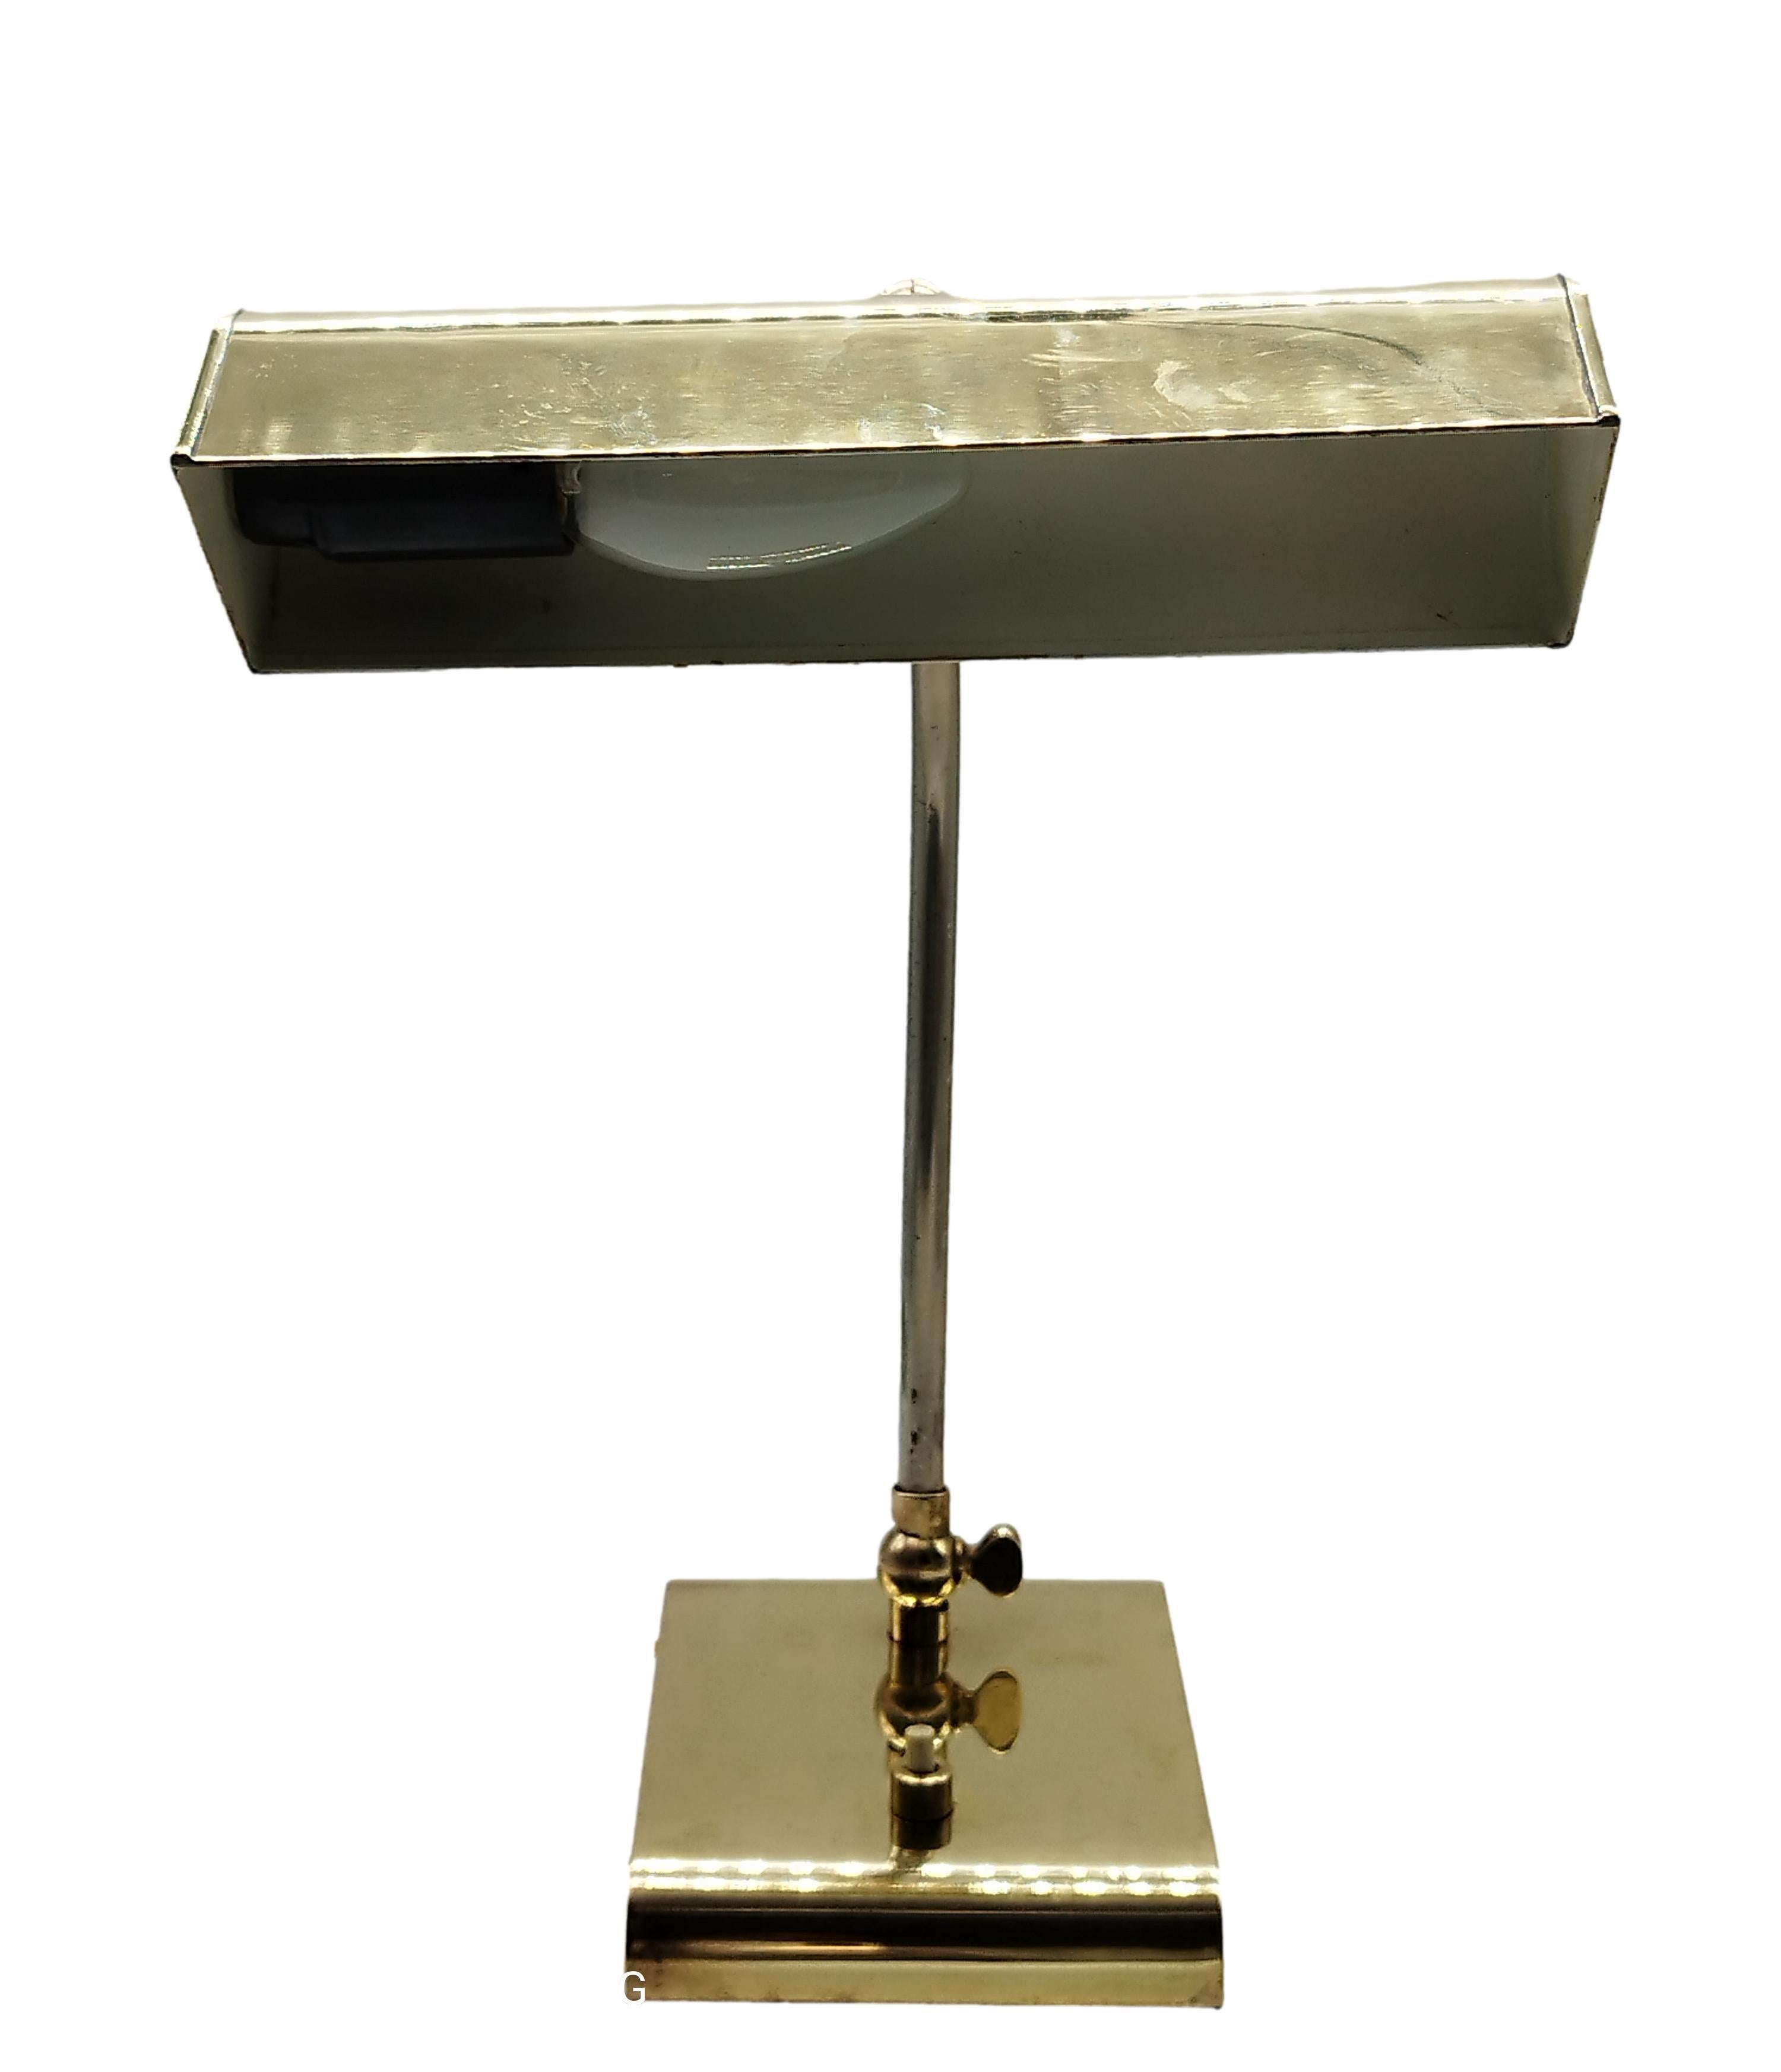 Brass table lamp with pivoting bell section. Good condition, totally brass, joints checked and working.
